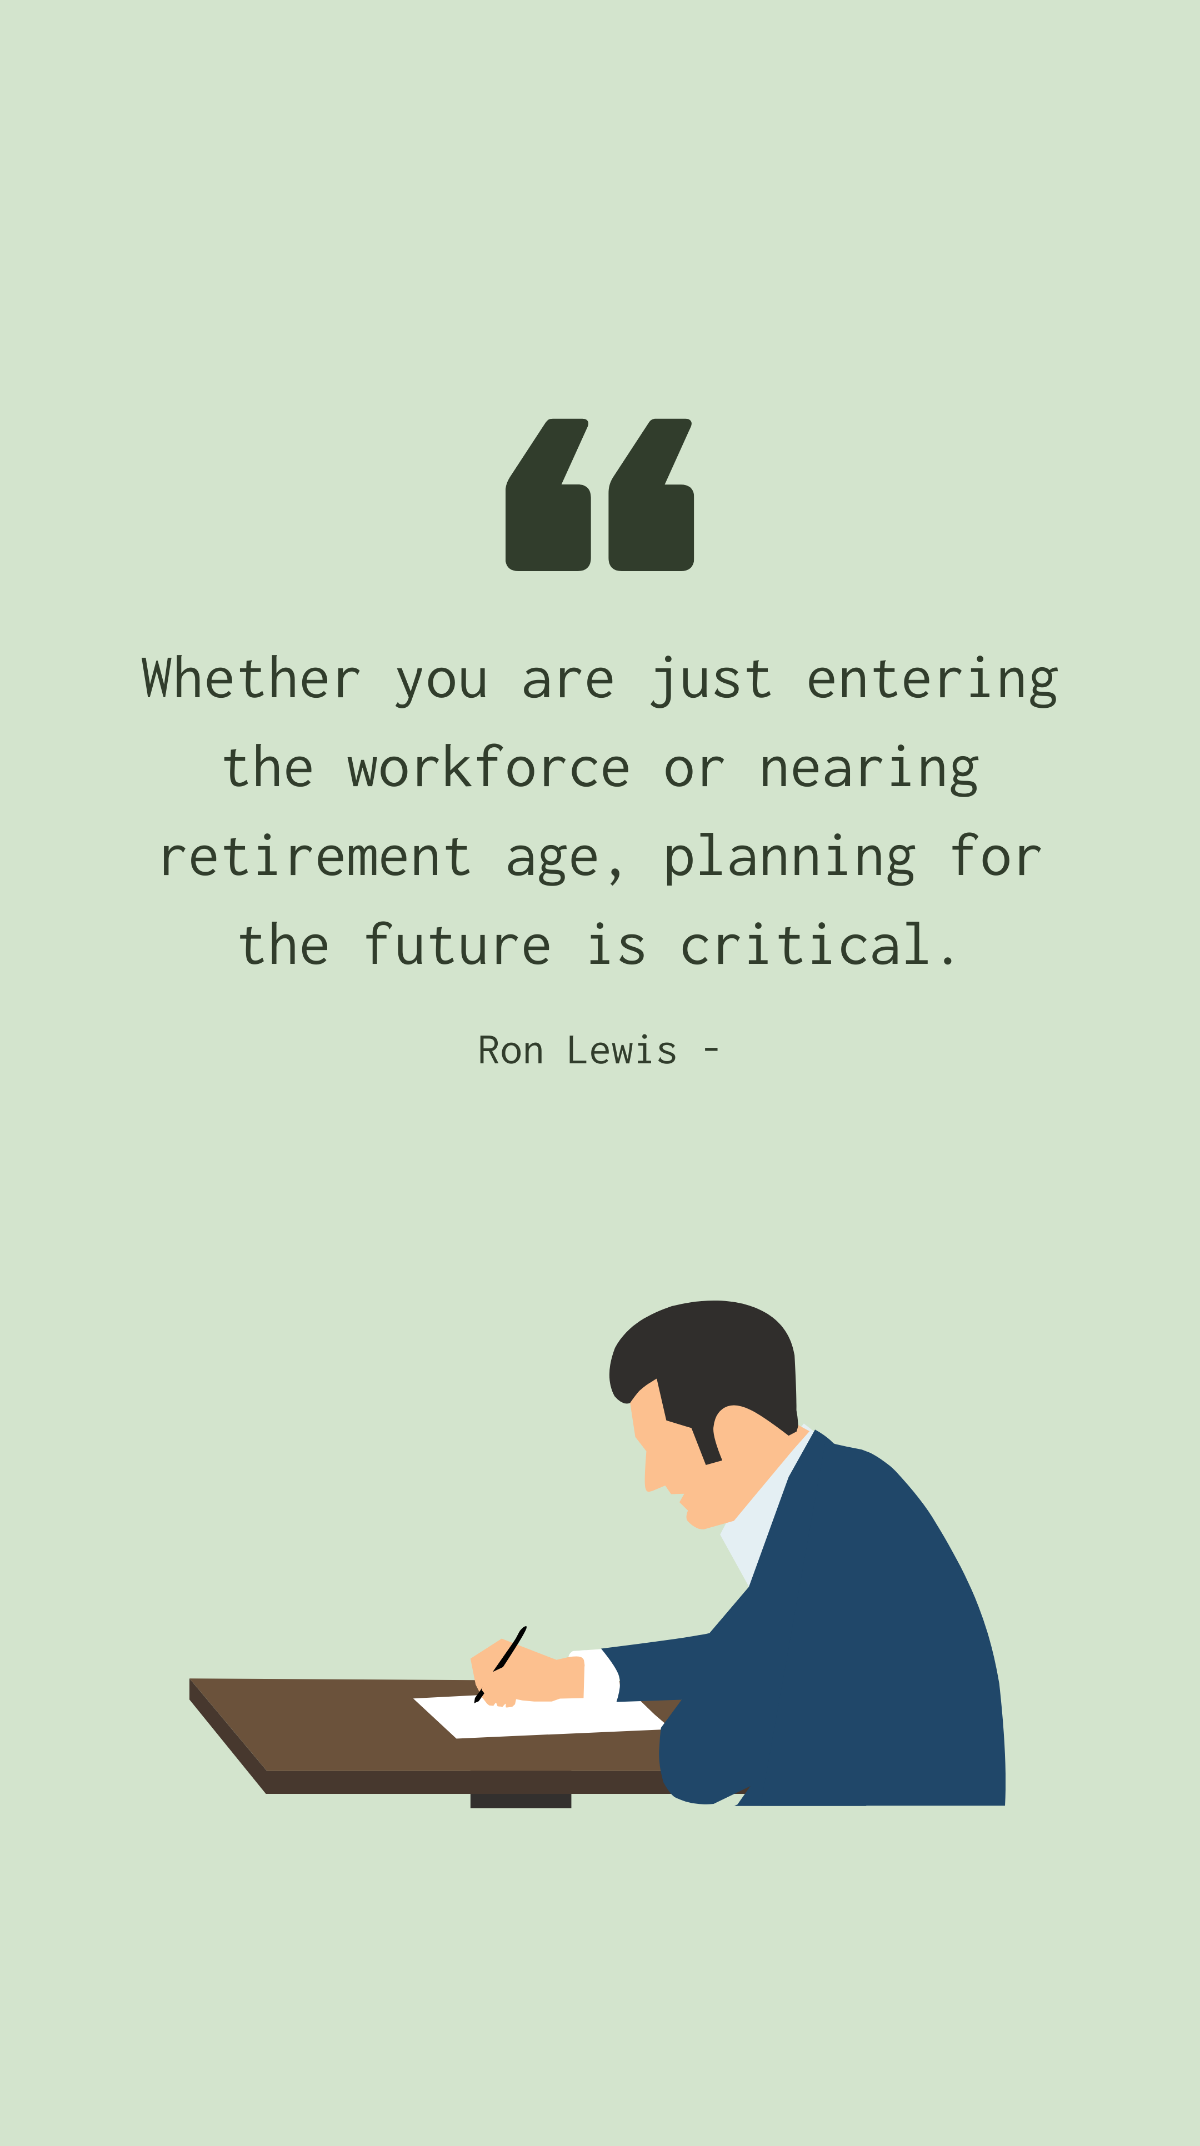 Ron Lewis - Whether you are just entering the workforce or nearing retirement age, planning for the future is critical.